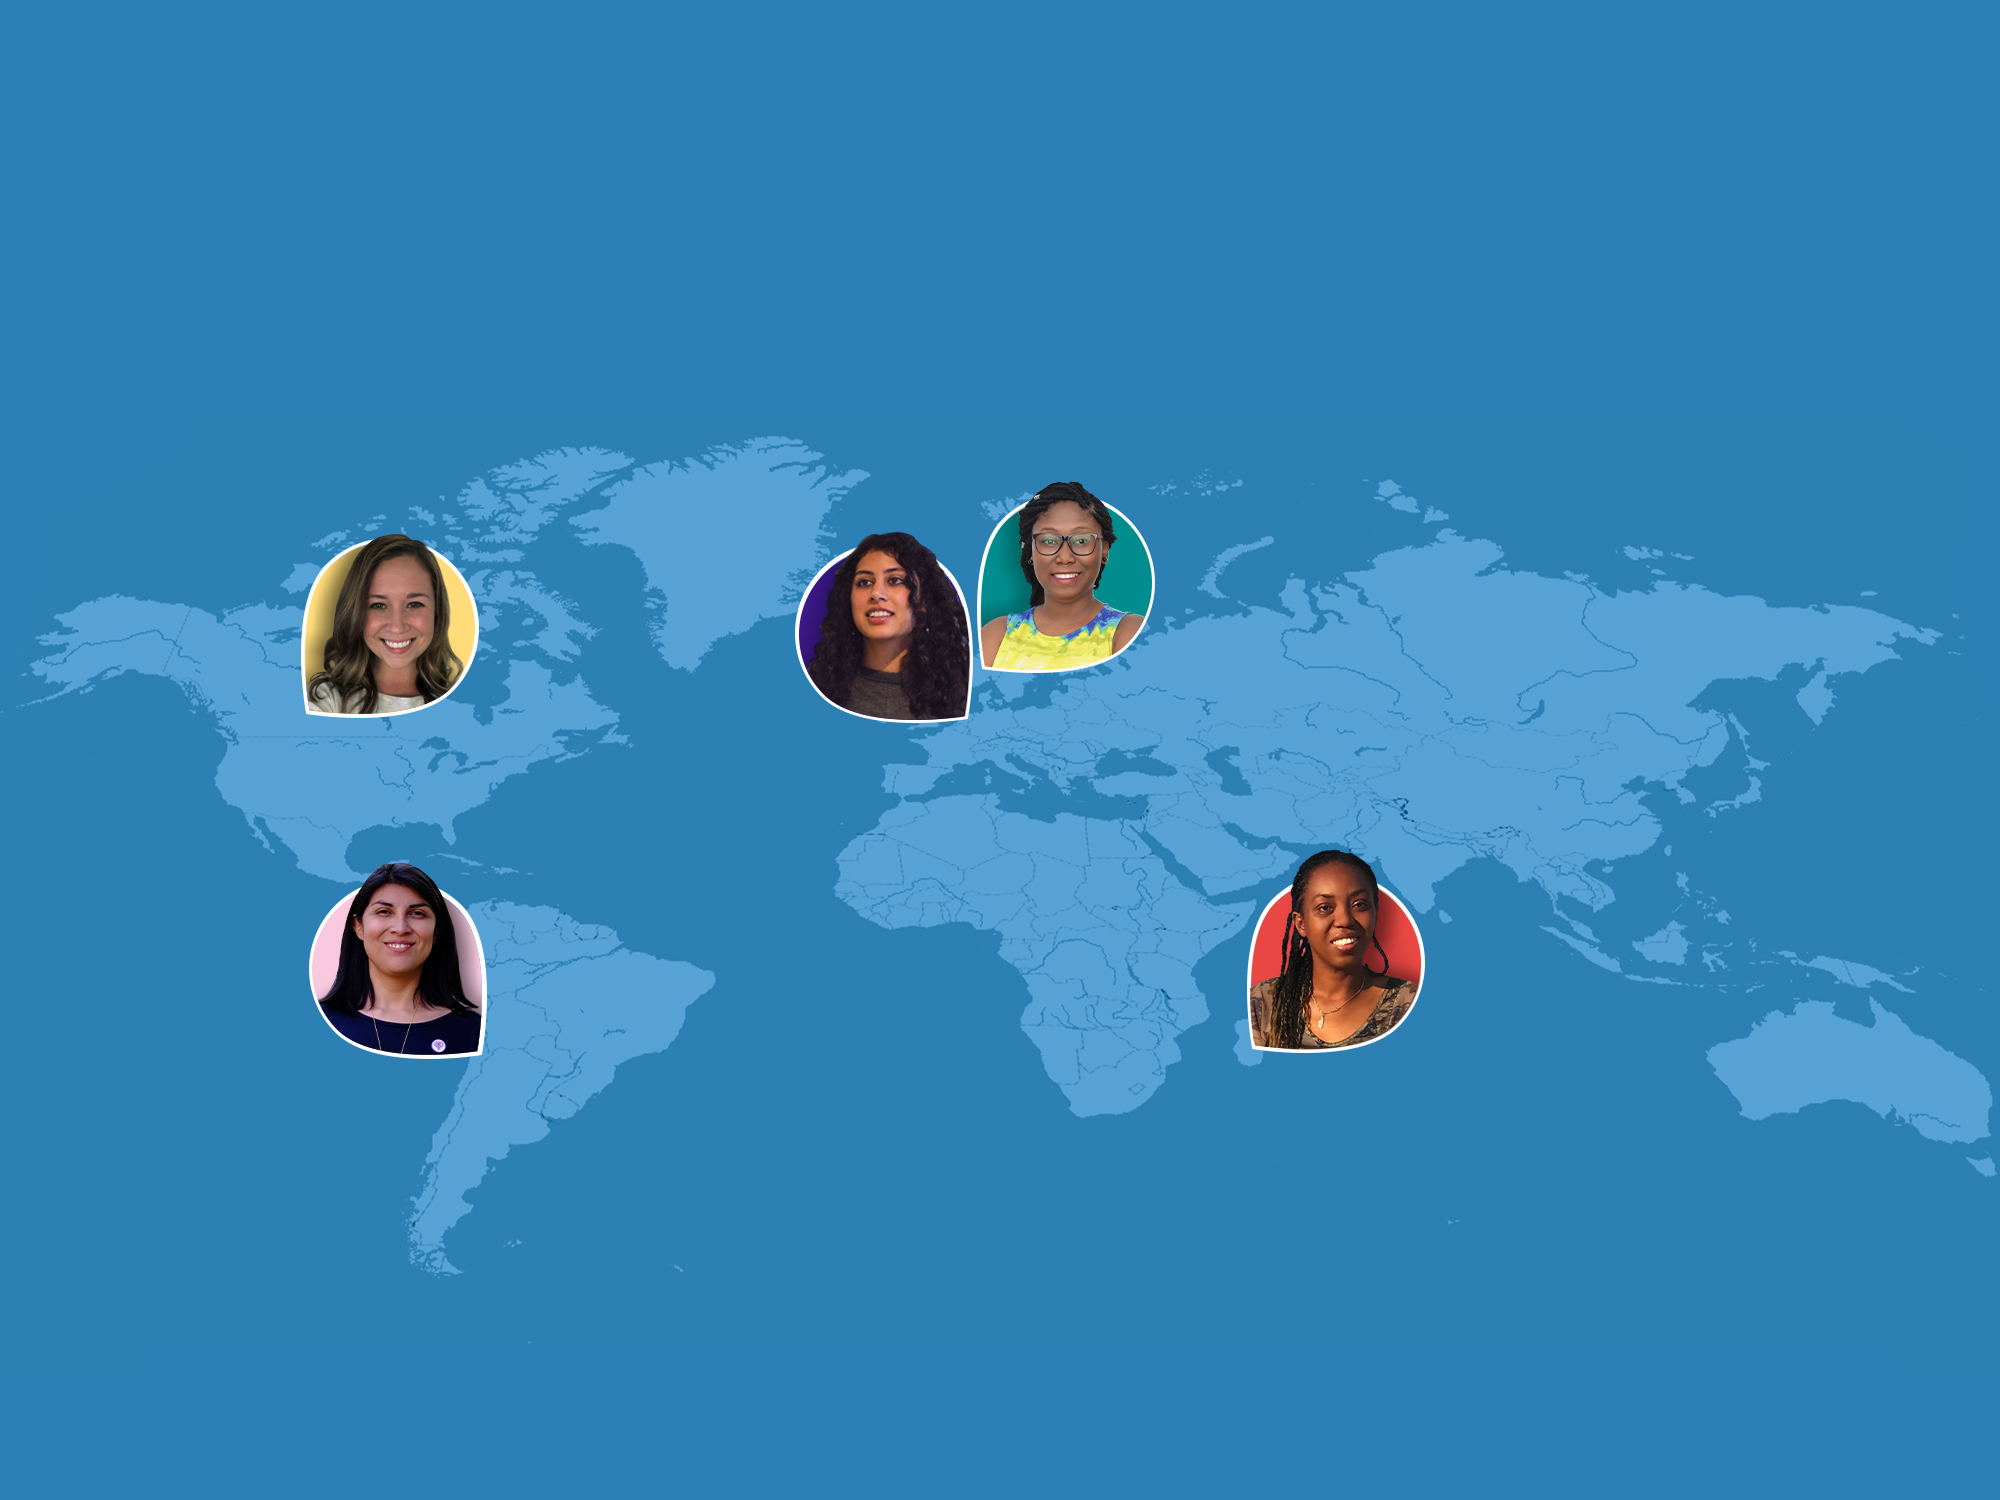 World map showing pins with headshots of 5 women from different countries